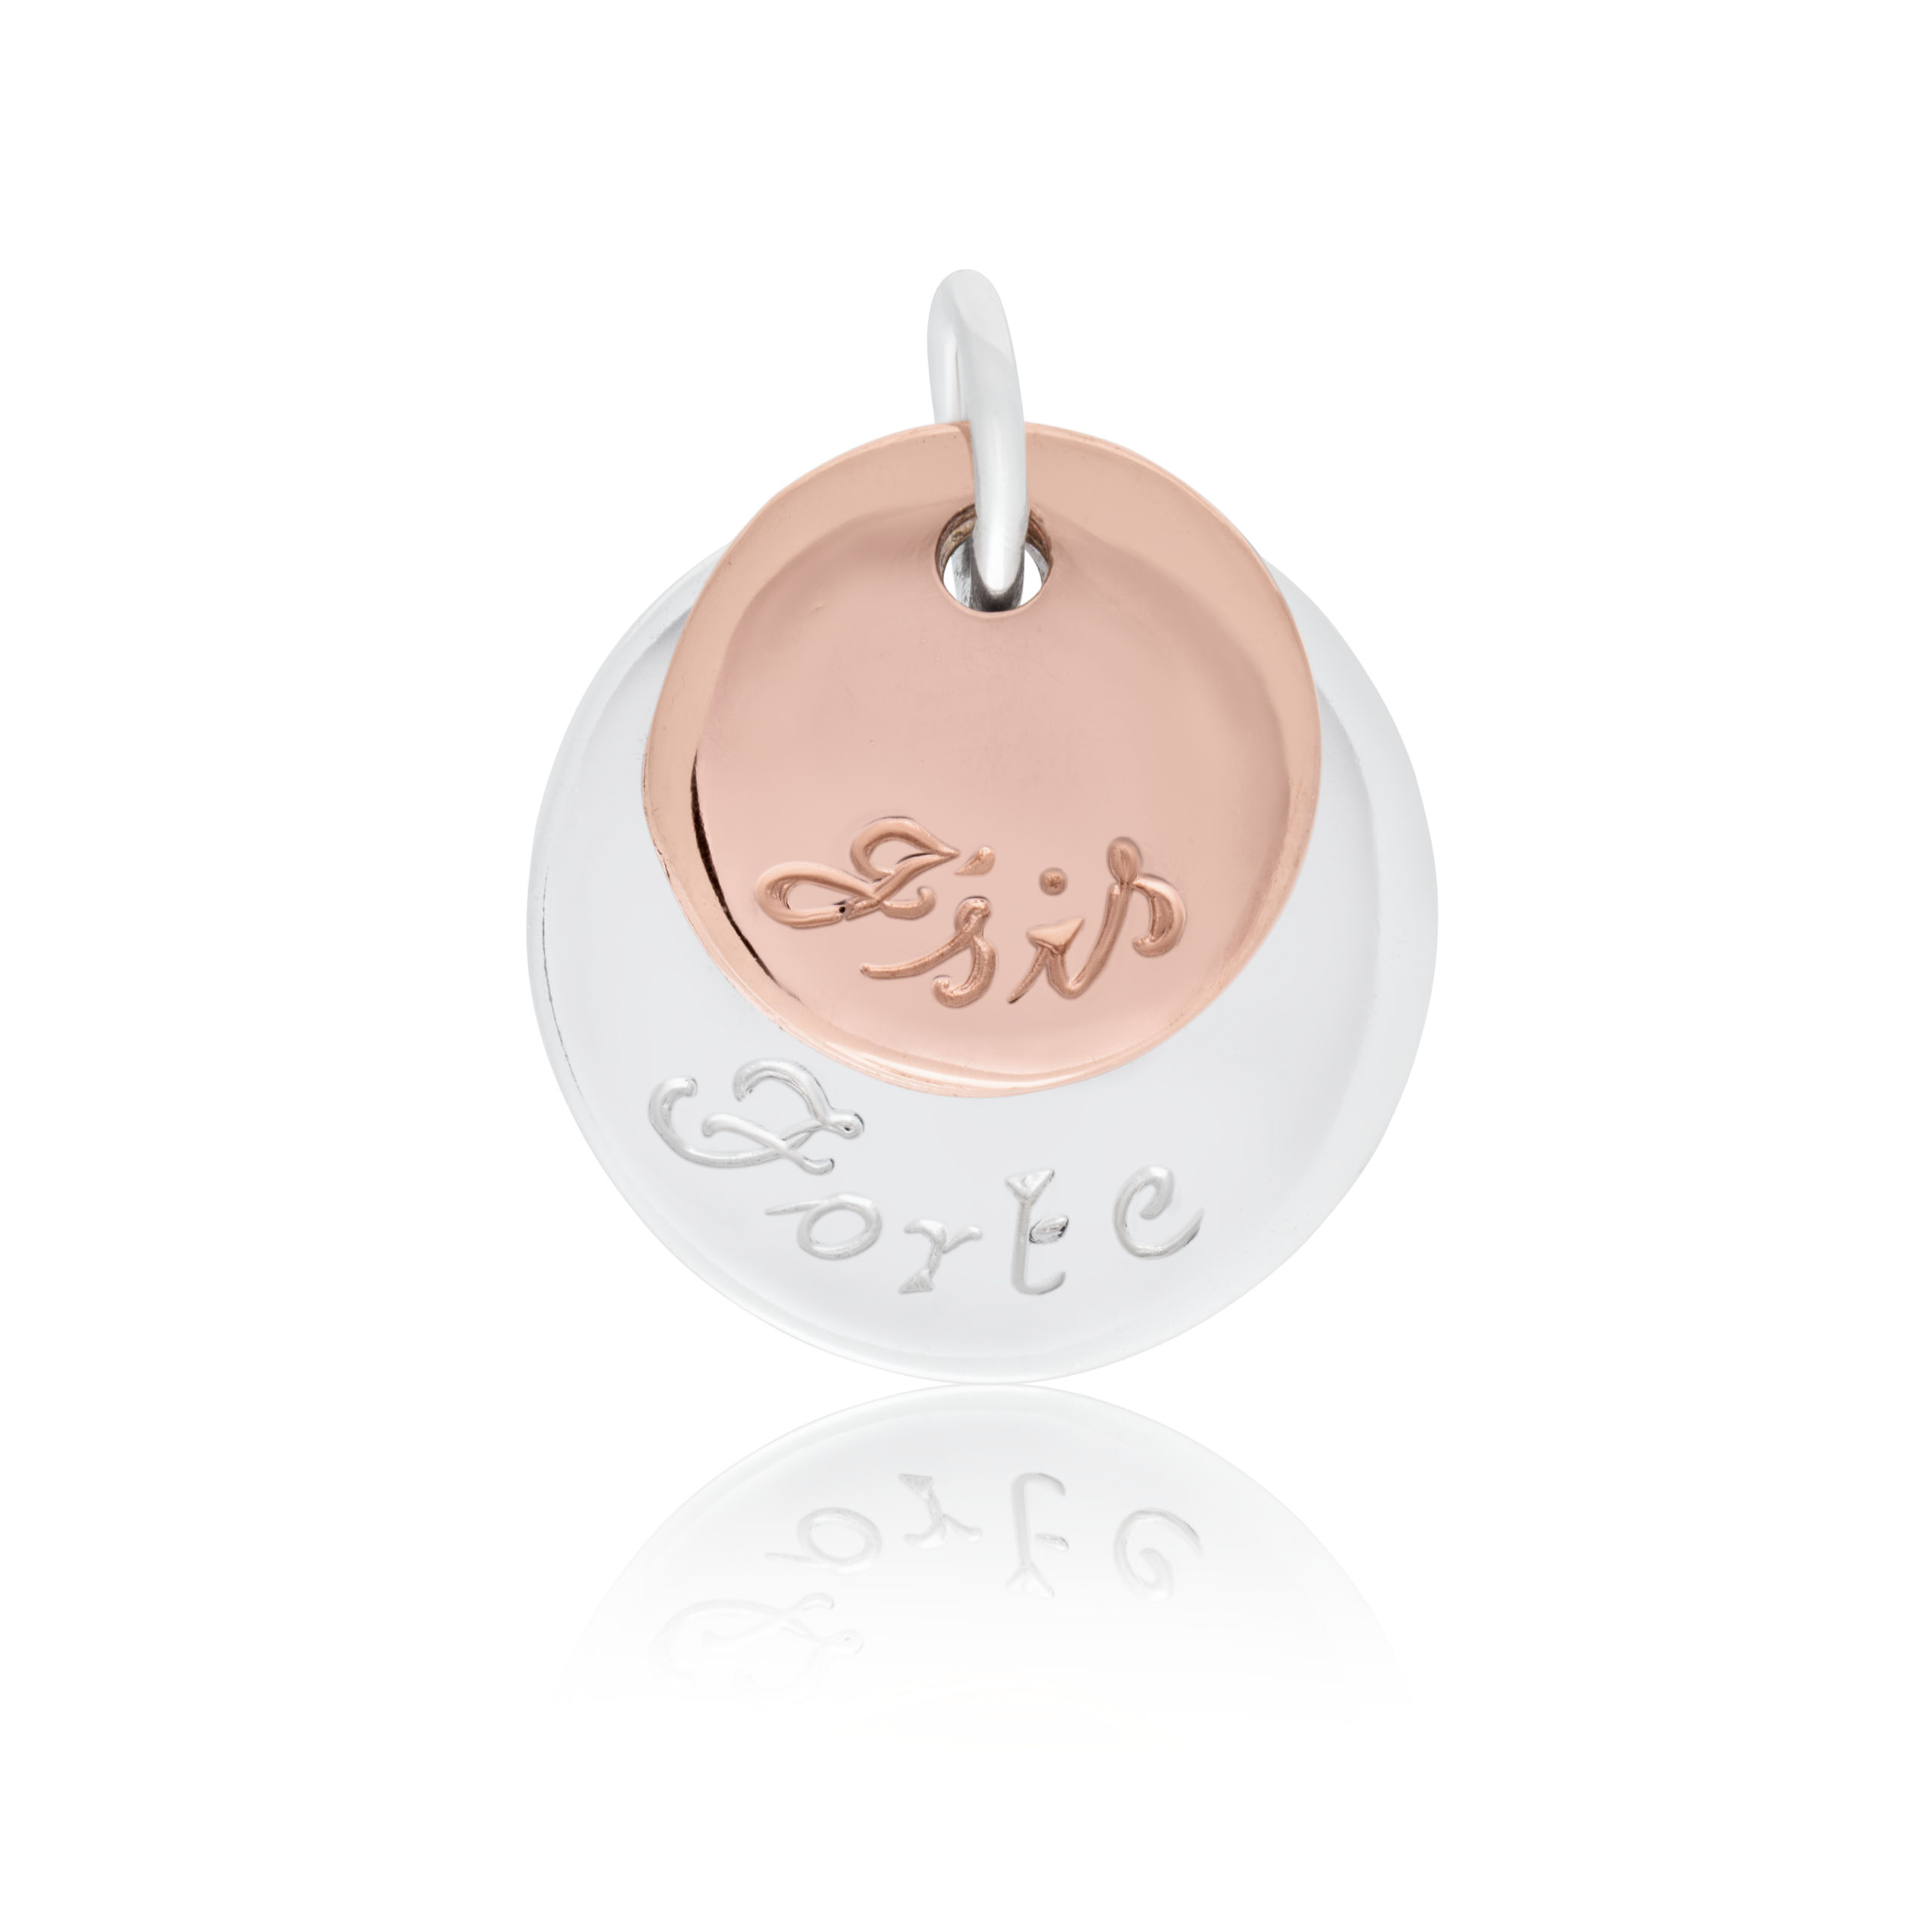 I Am Strong Sterling Silver & 9ct Rose Gold Charm / Pendant